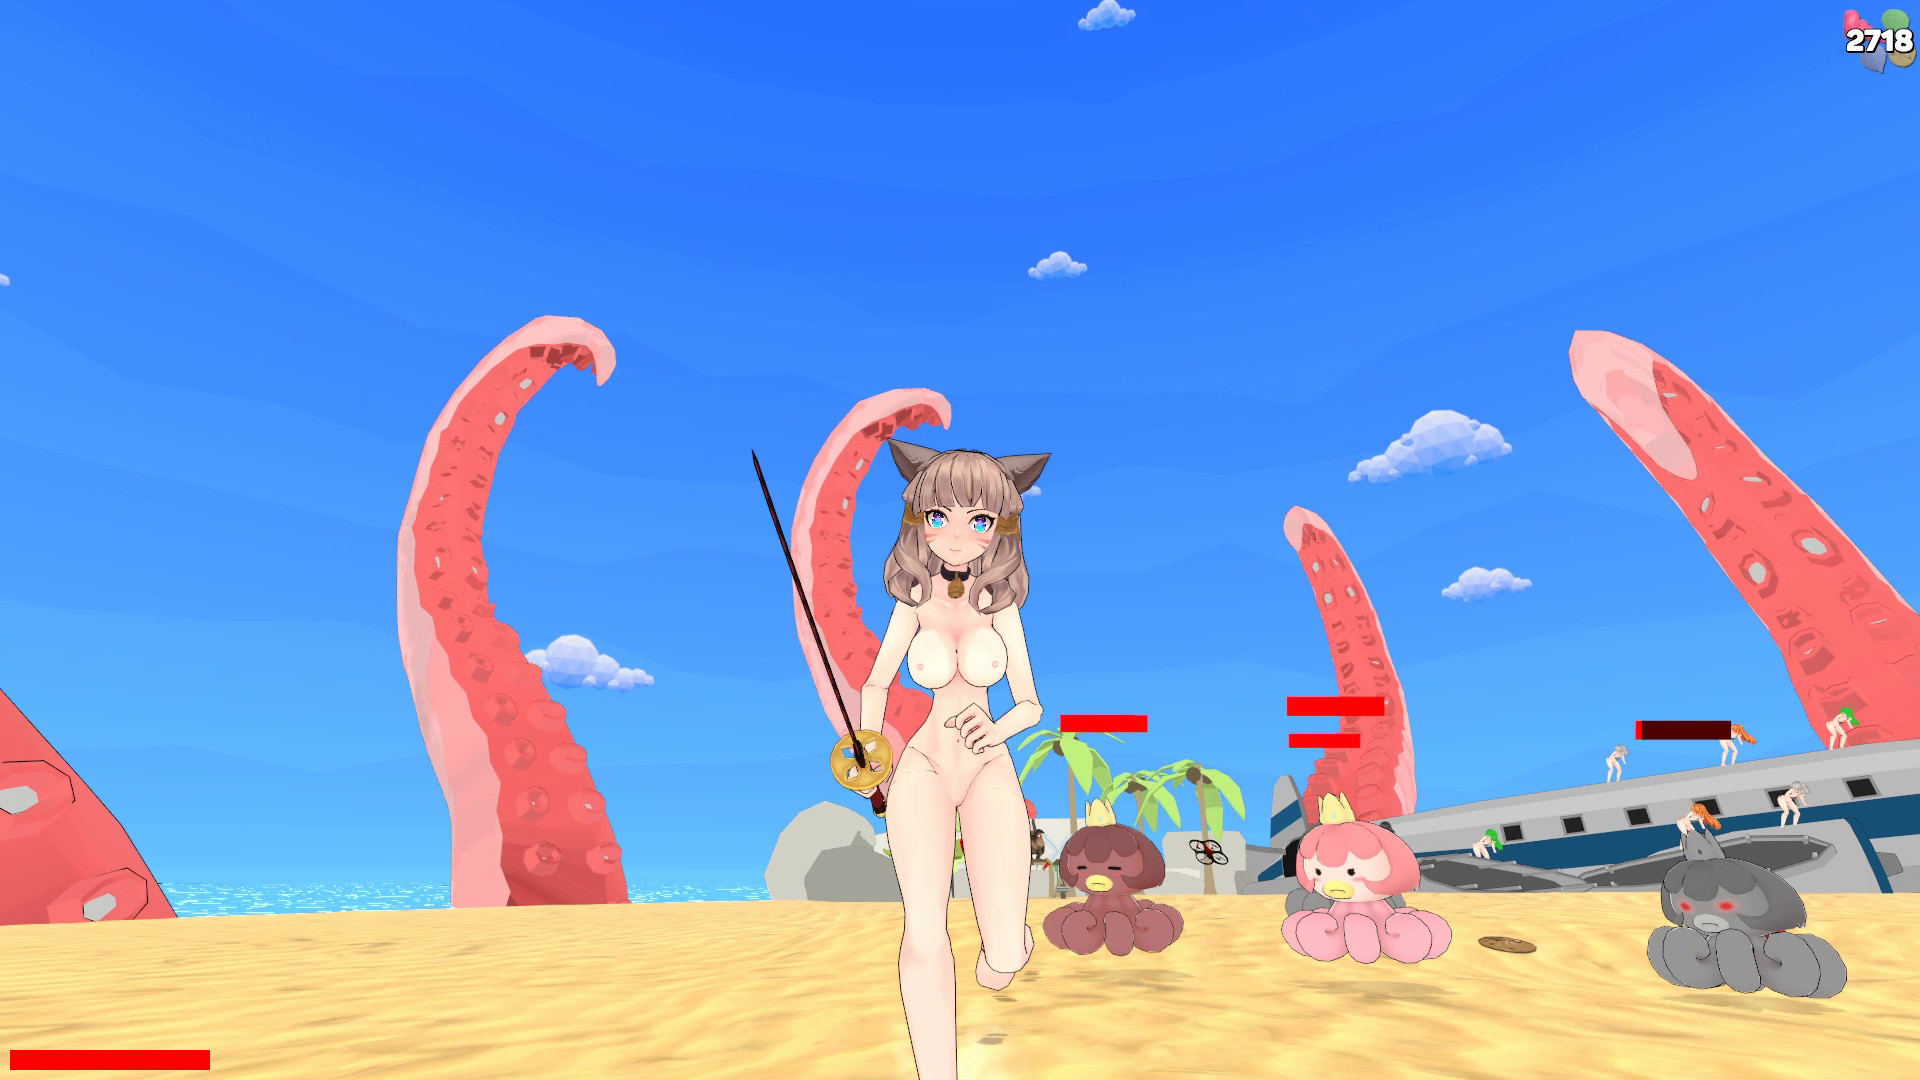 Tentacle game fan photos